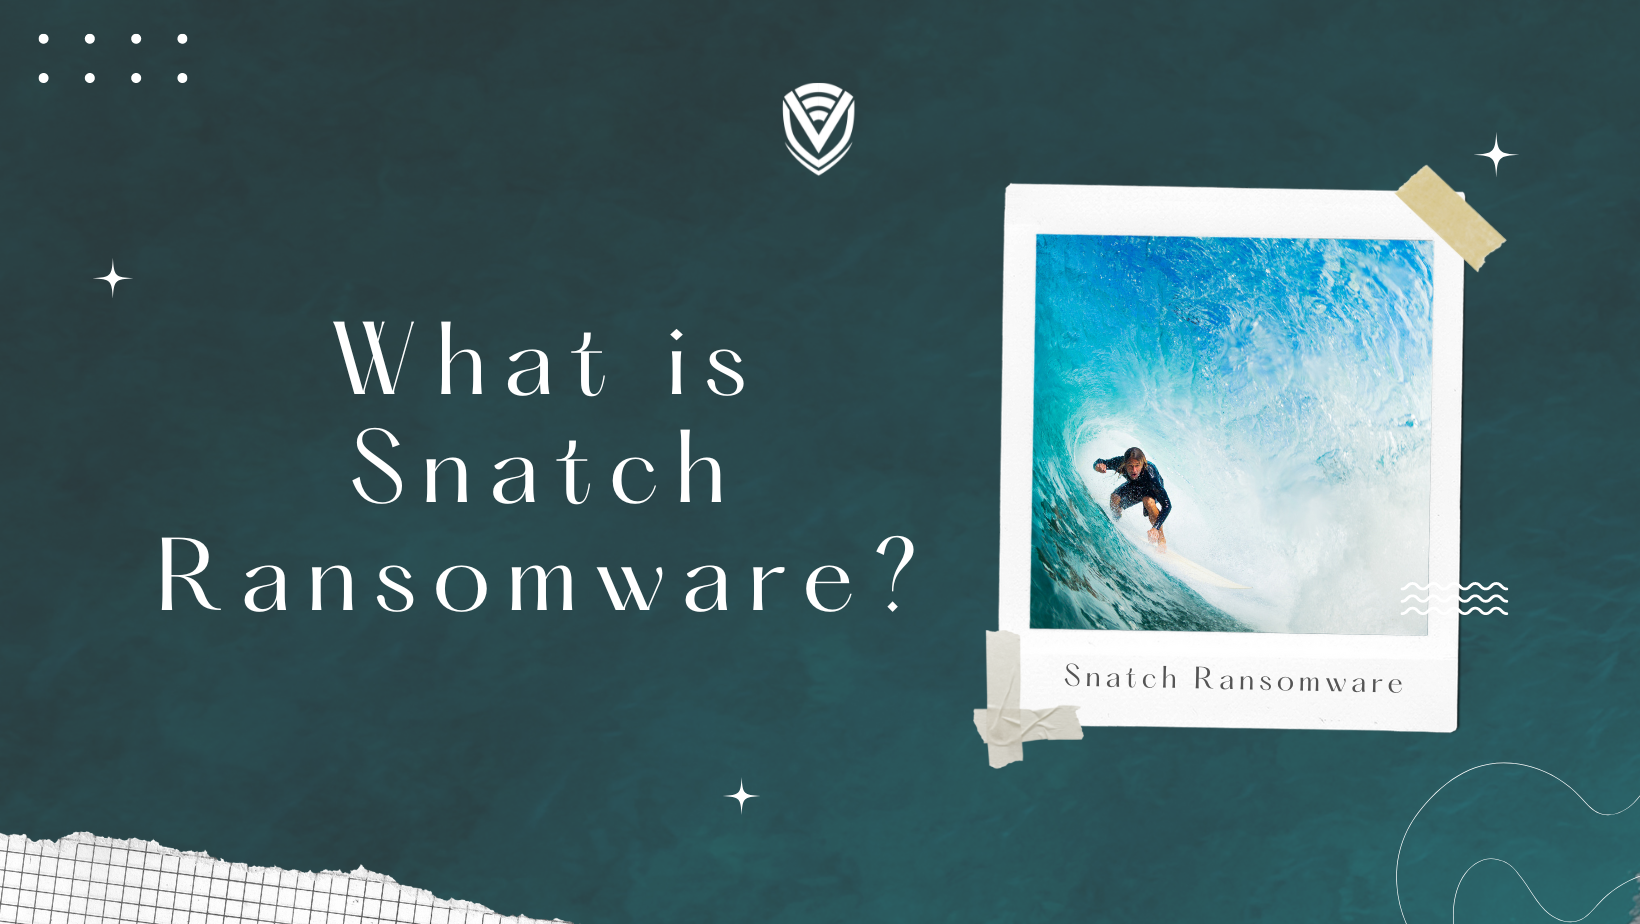 What is Snatch Ransomware?